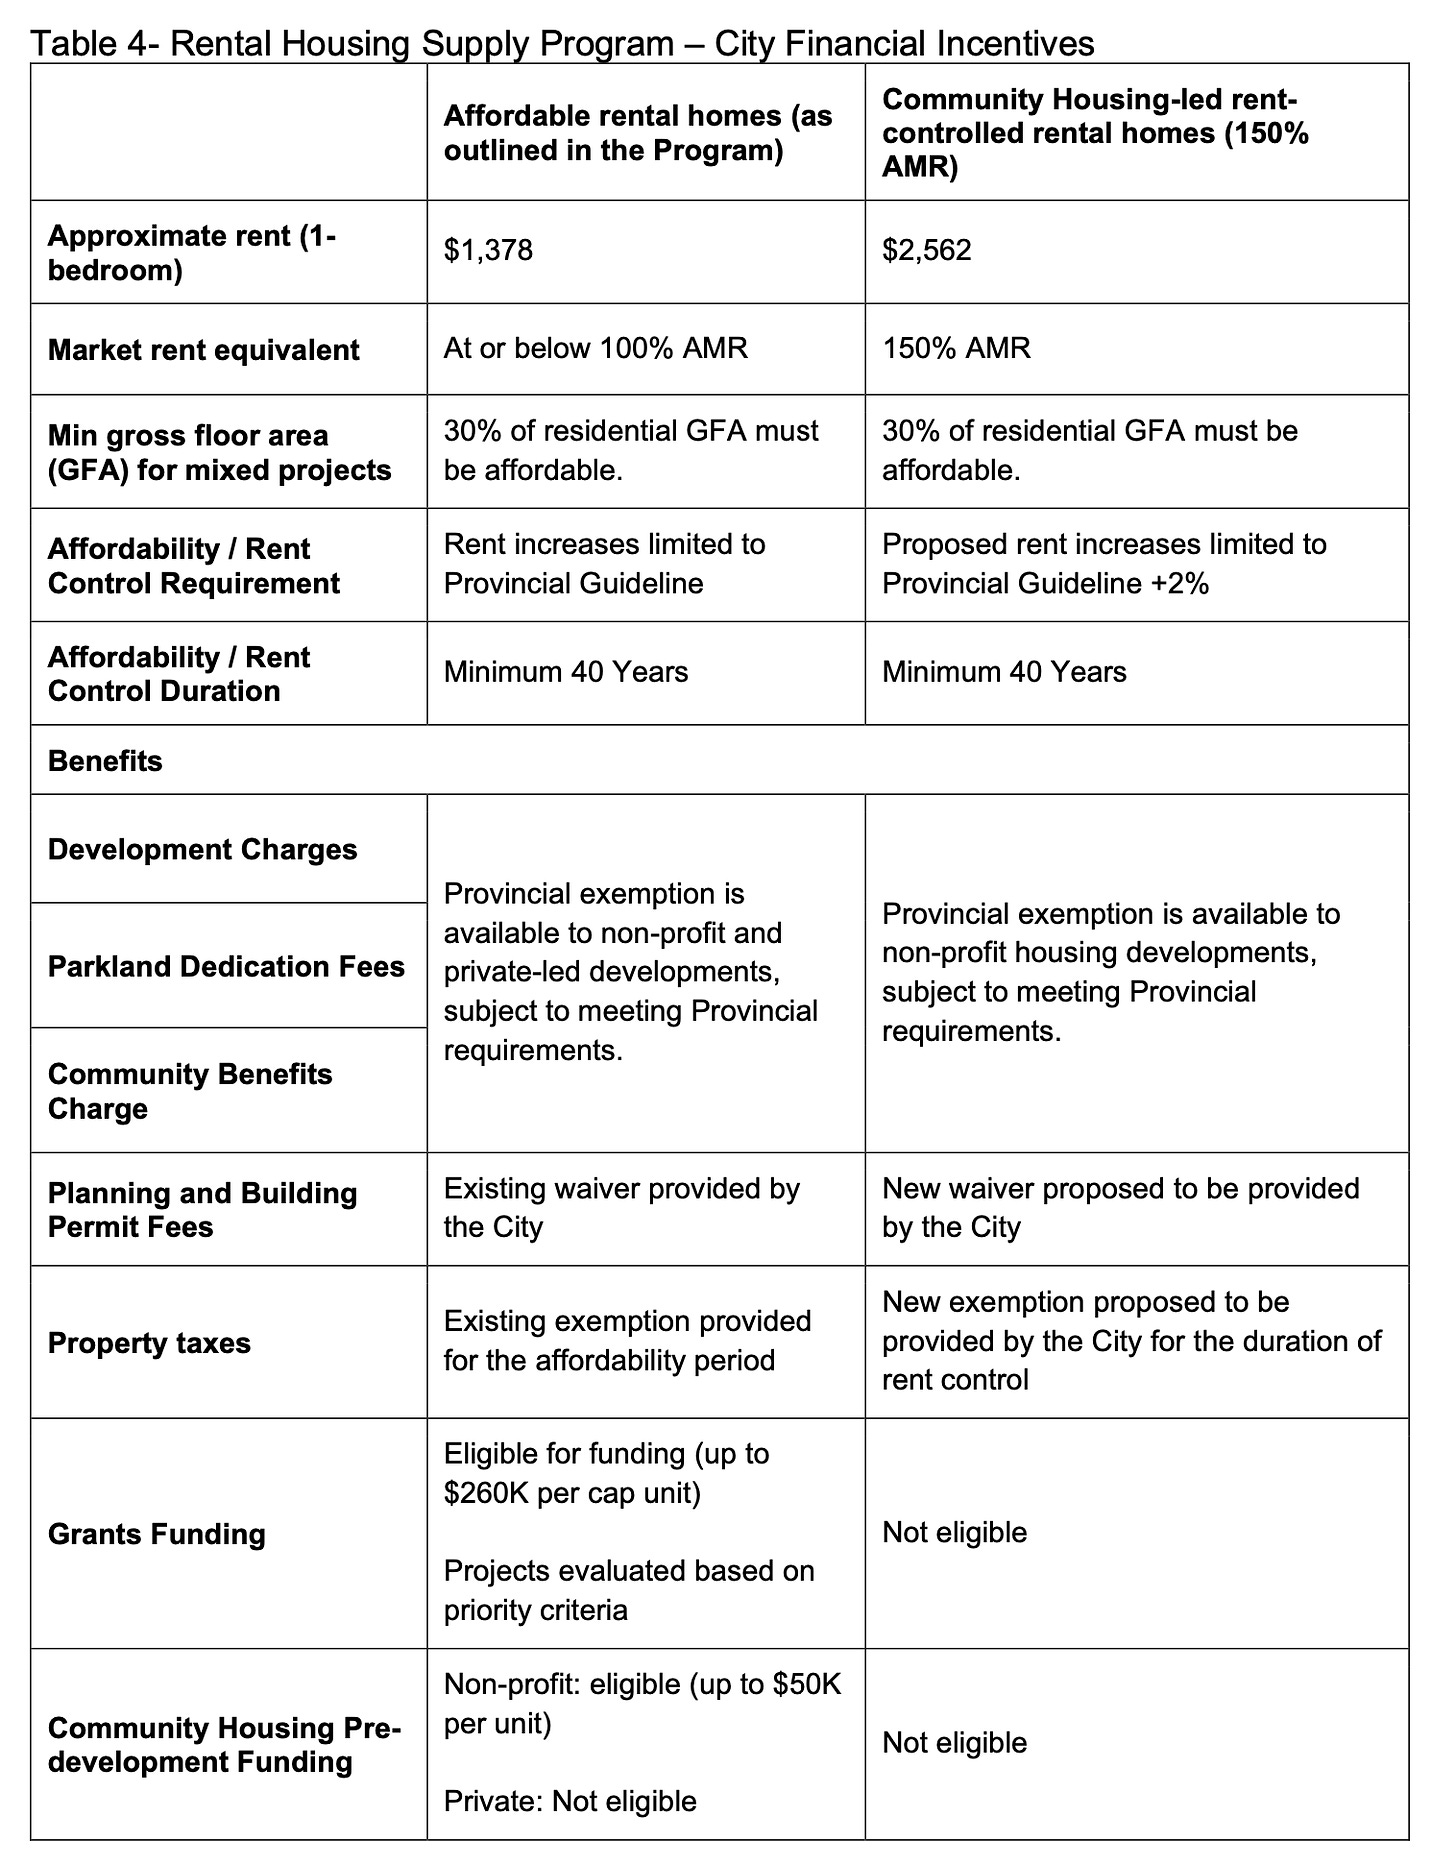 Table 4 from Rental Housing Supply Program report